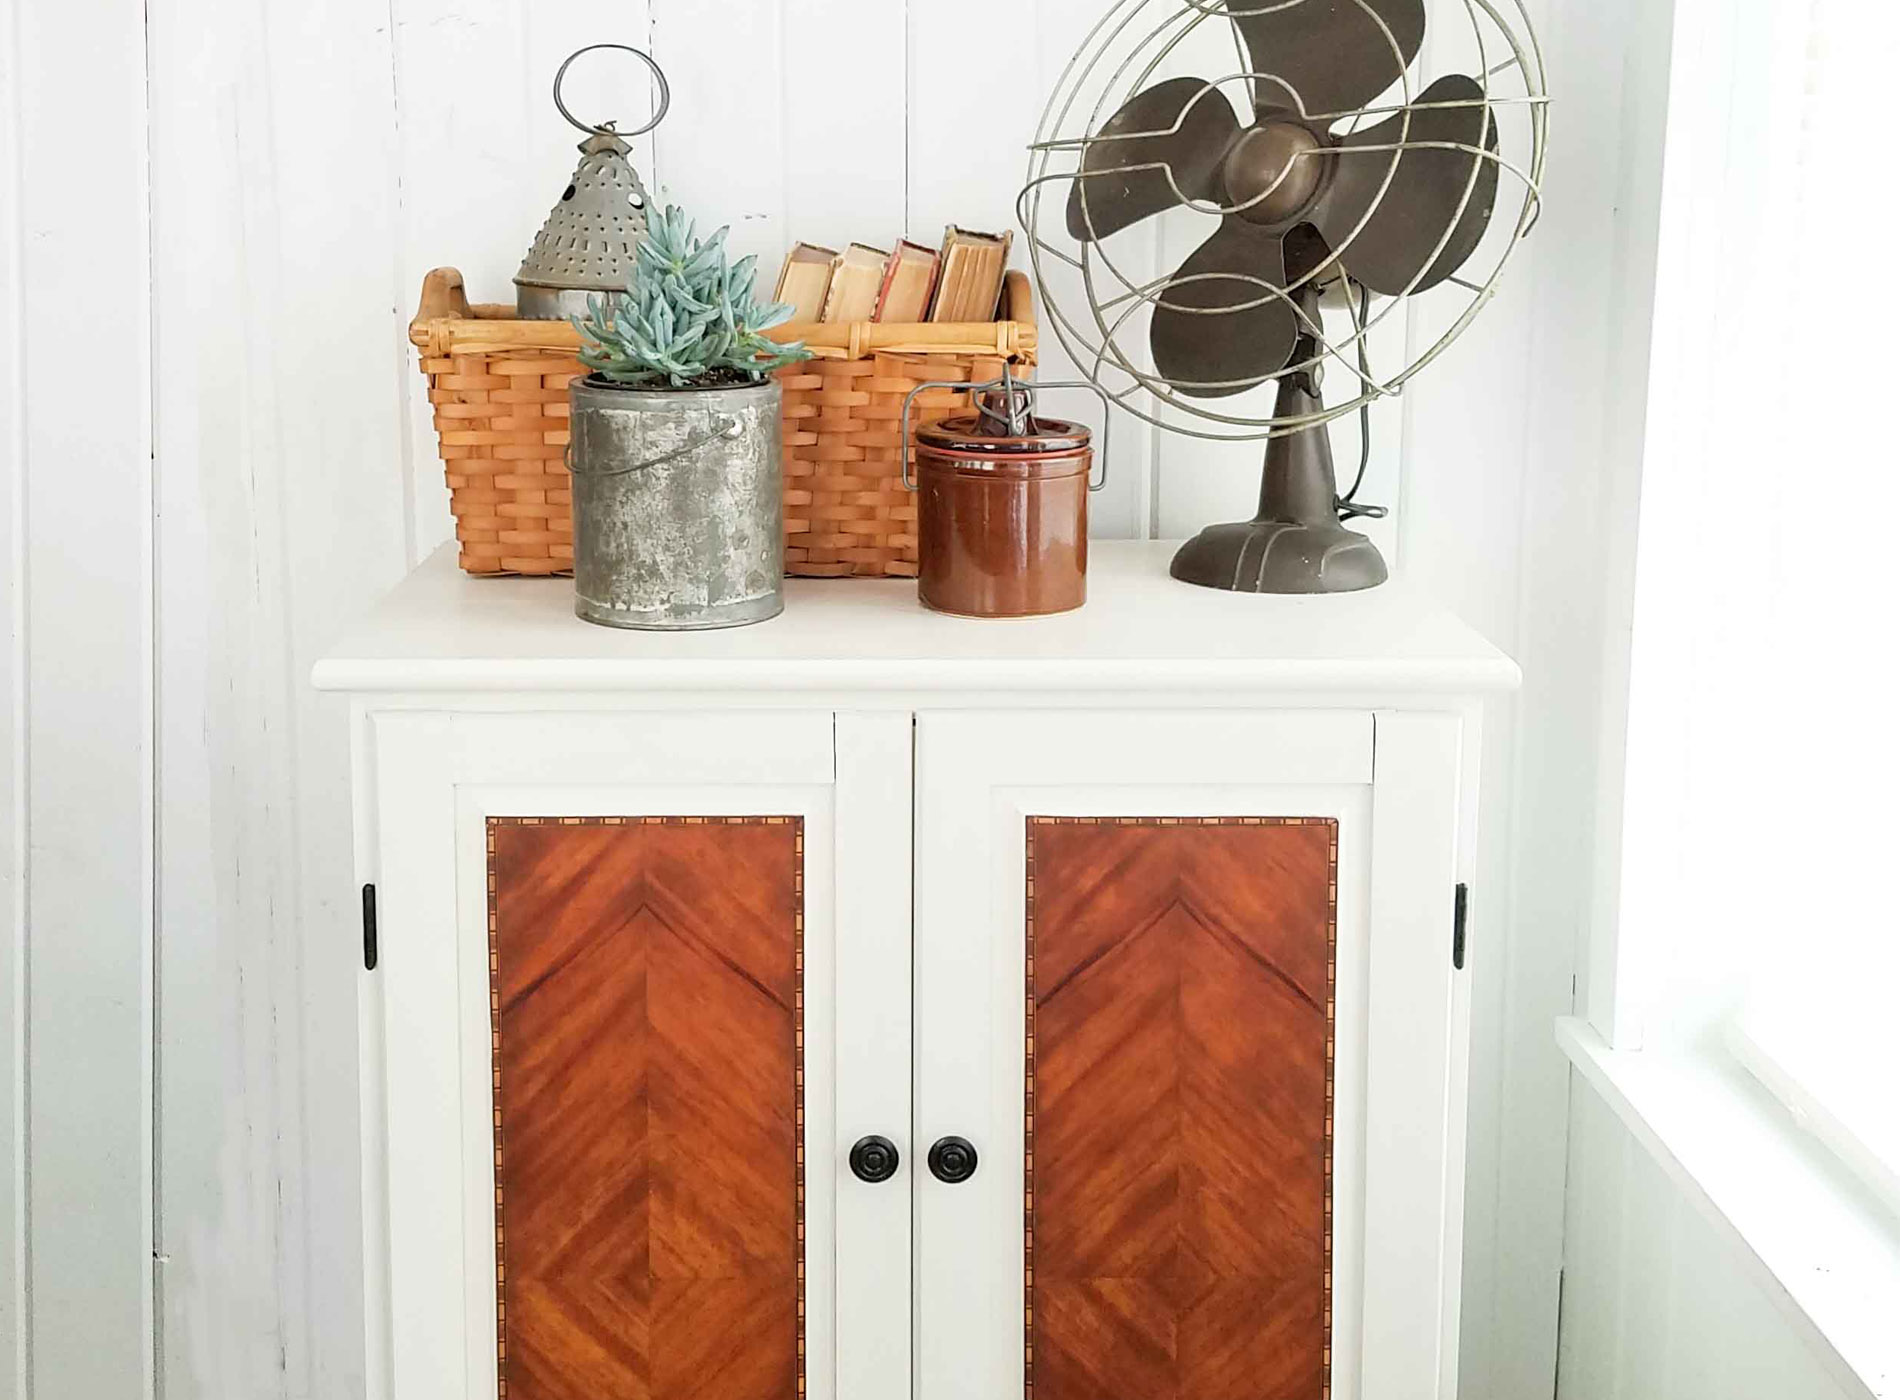 Featured Farmhouse Chic Cabinet Makeover by Prodigal Pieces | prodigalpieces.com